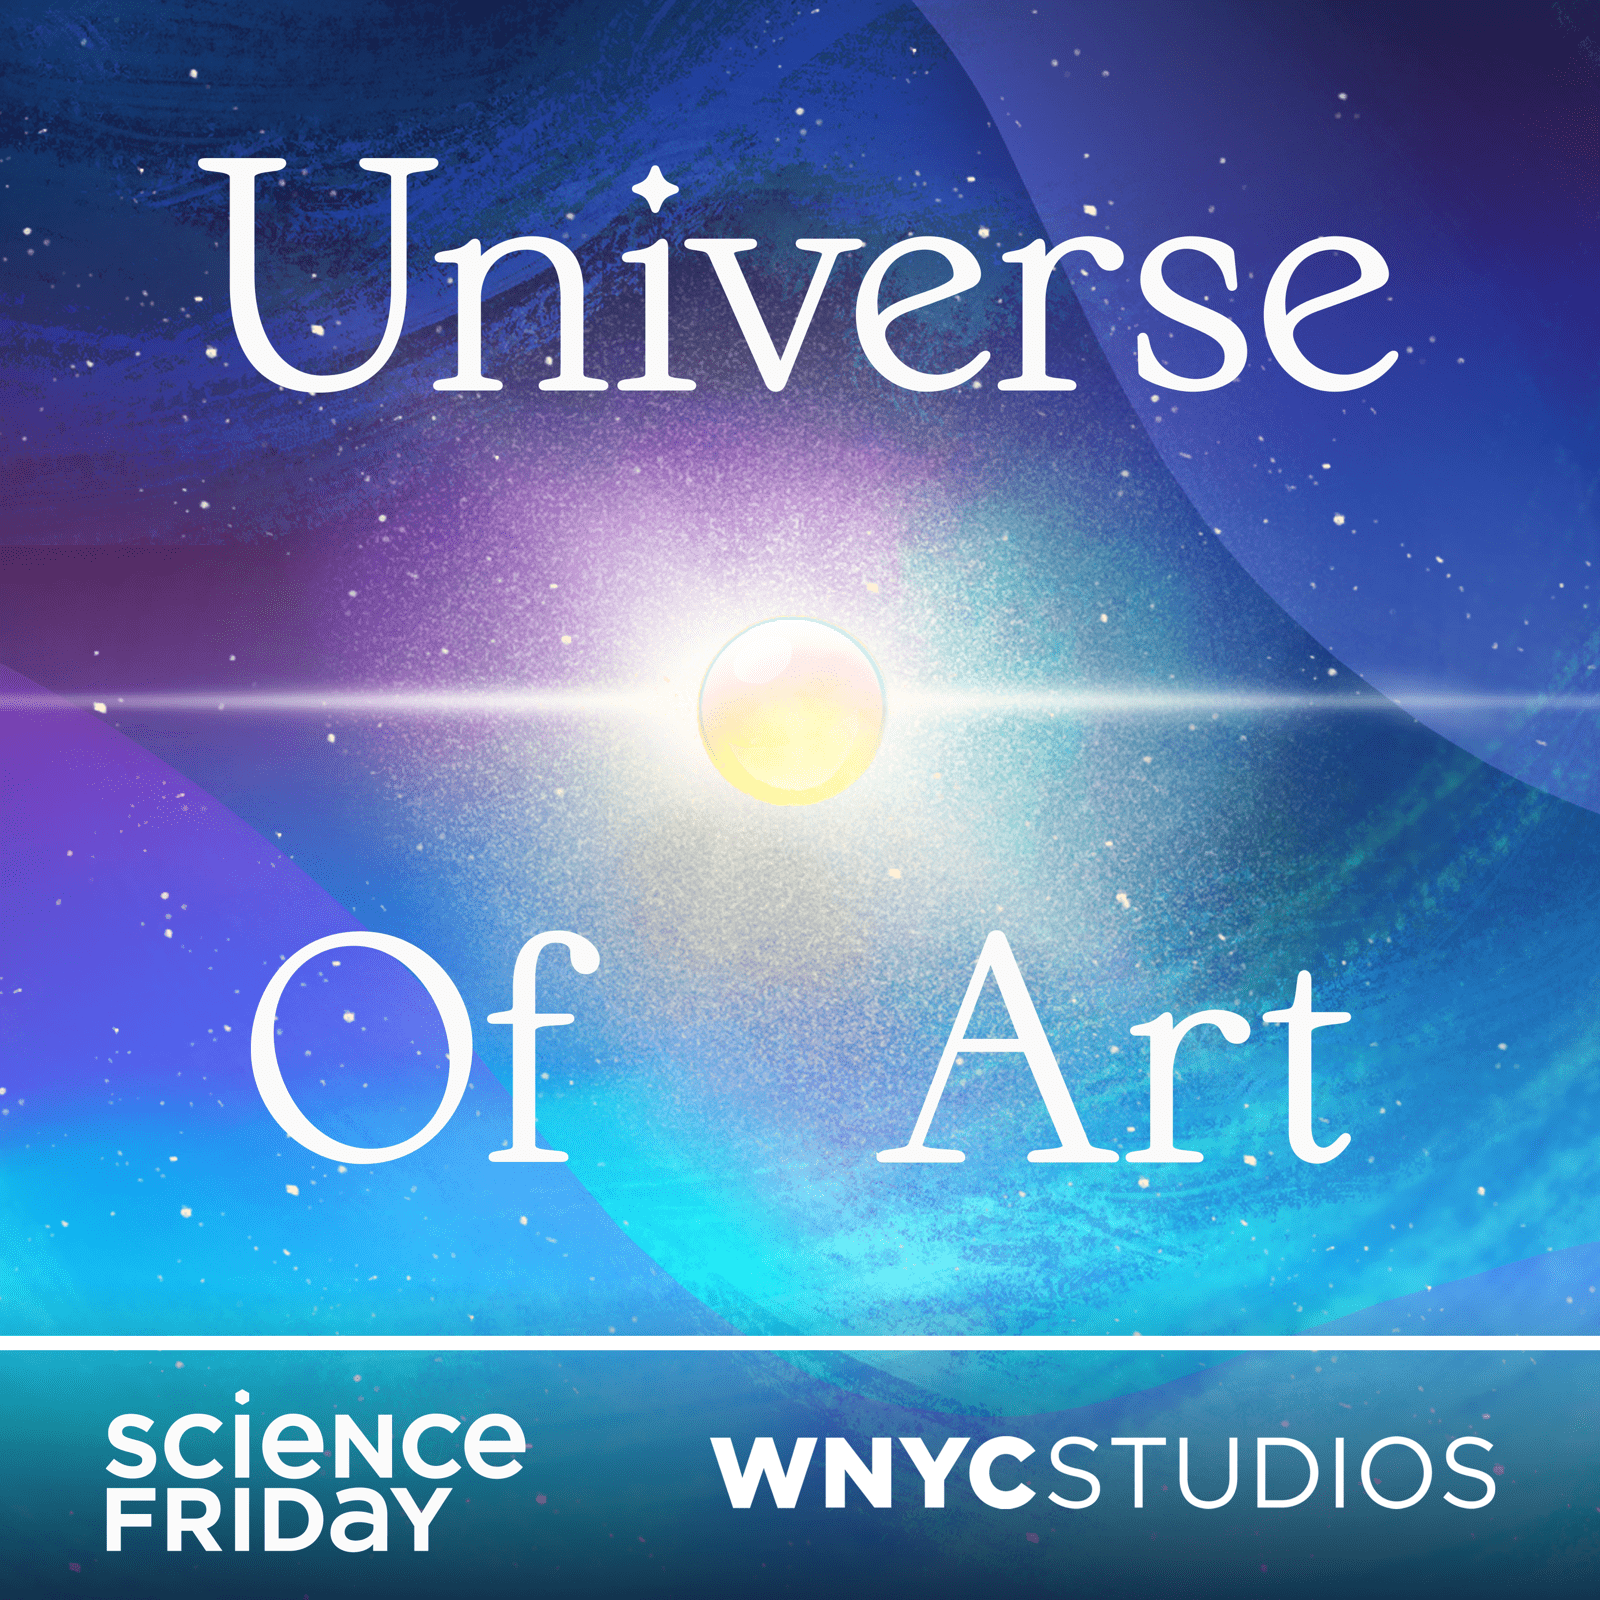 podcast album art that says universe of art, from science friday and wnyc studios. the background is an abstract ethereal painting that looks like a nebula or galaxy with swirling blue and purple clouds. a glowing abstract orb is at the center